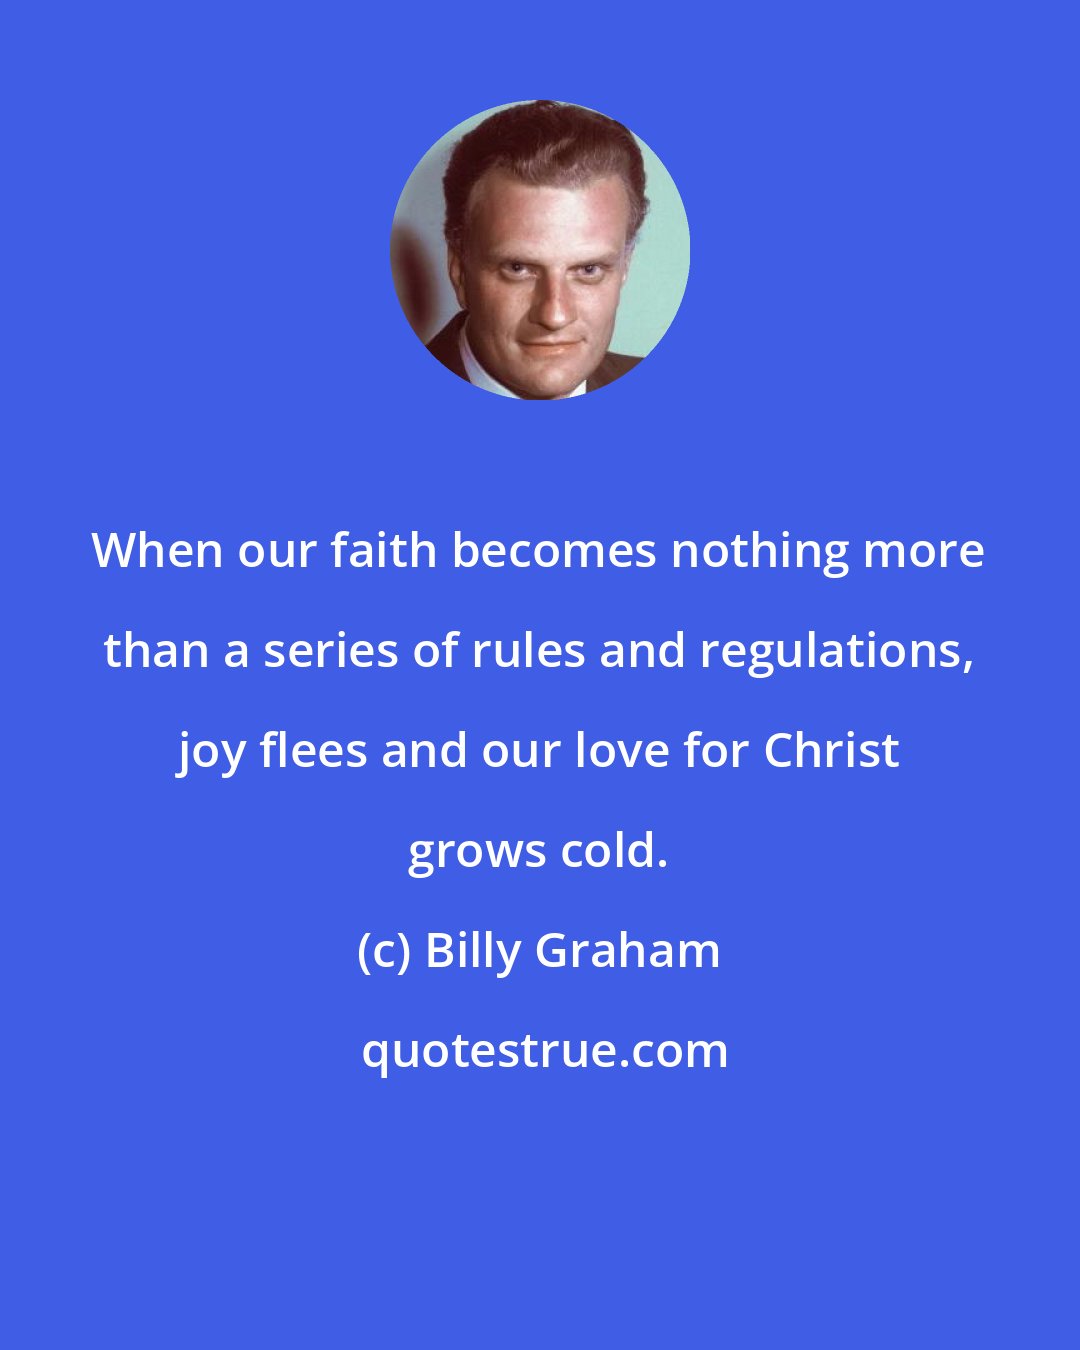 Billy Graham: When our faith becomes nothing more than a series of rules and regulations, joy flees and our love for Christ grows cold.